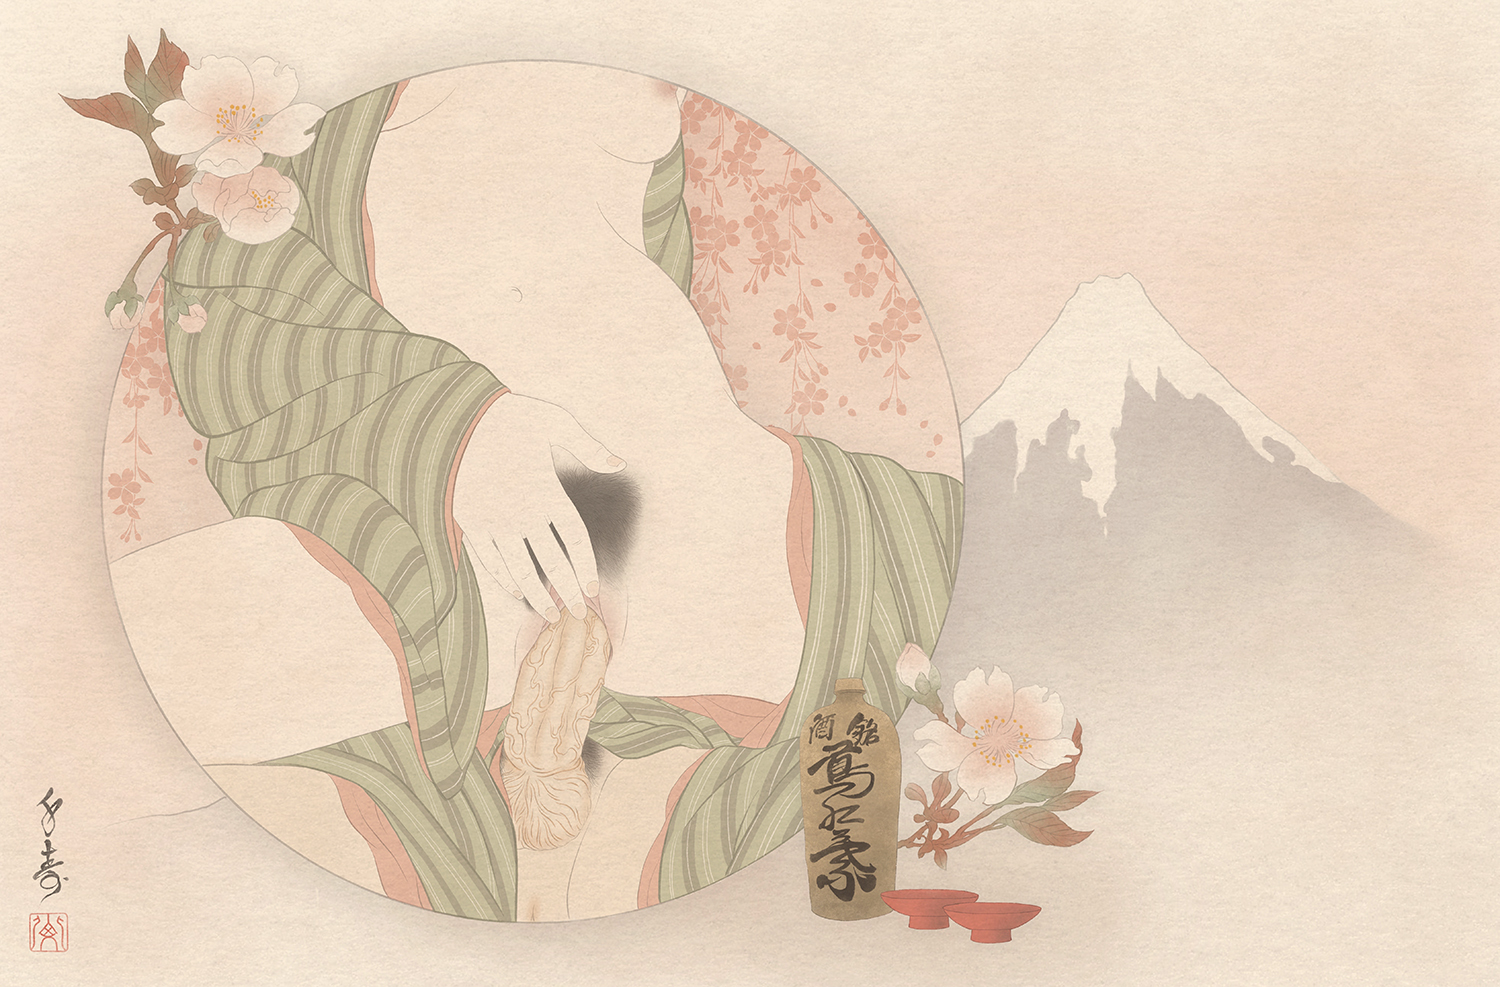 An erotic and sensual shunga print from the series "36 views of mt. Fuji" by Swedish artist Senju. It shows a man and a woman having passionate sex beneath blossoming cherry trees.